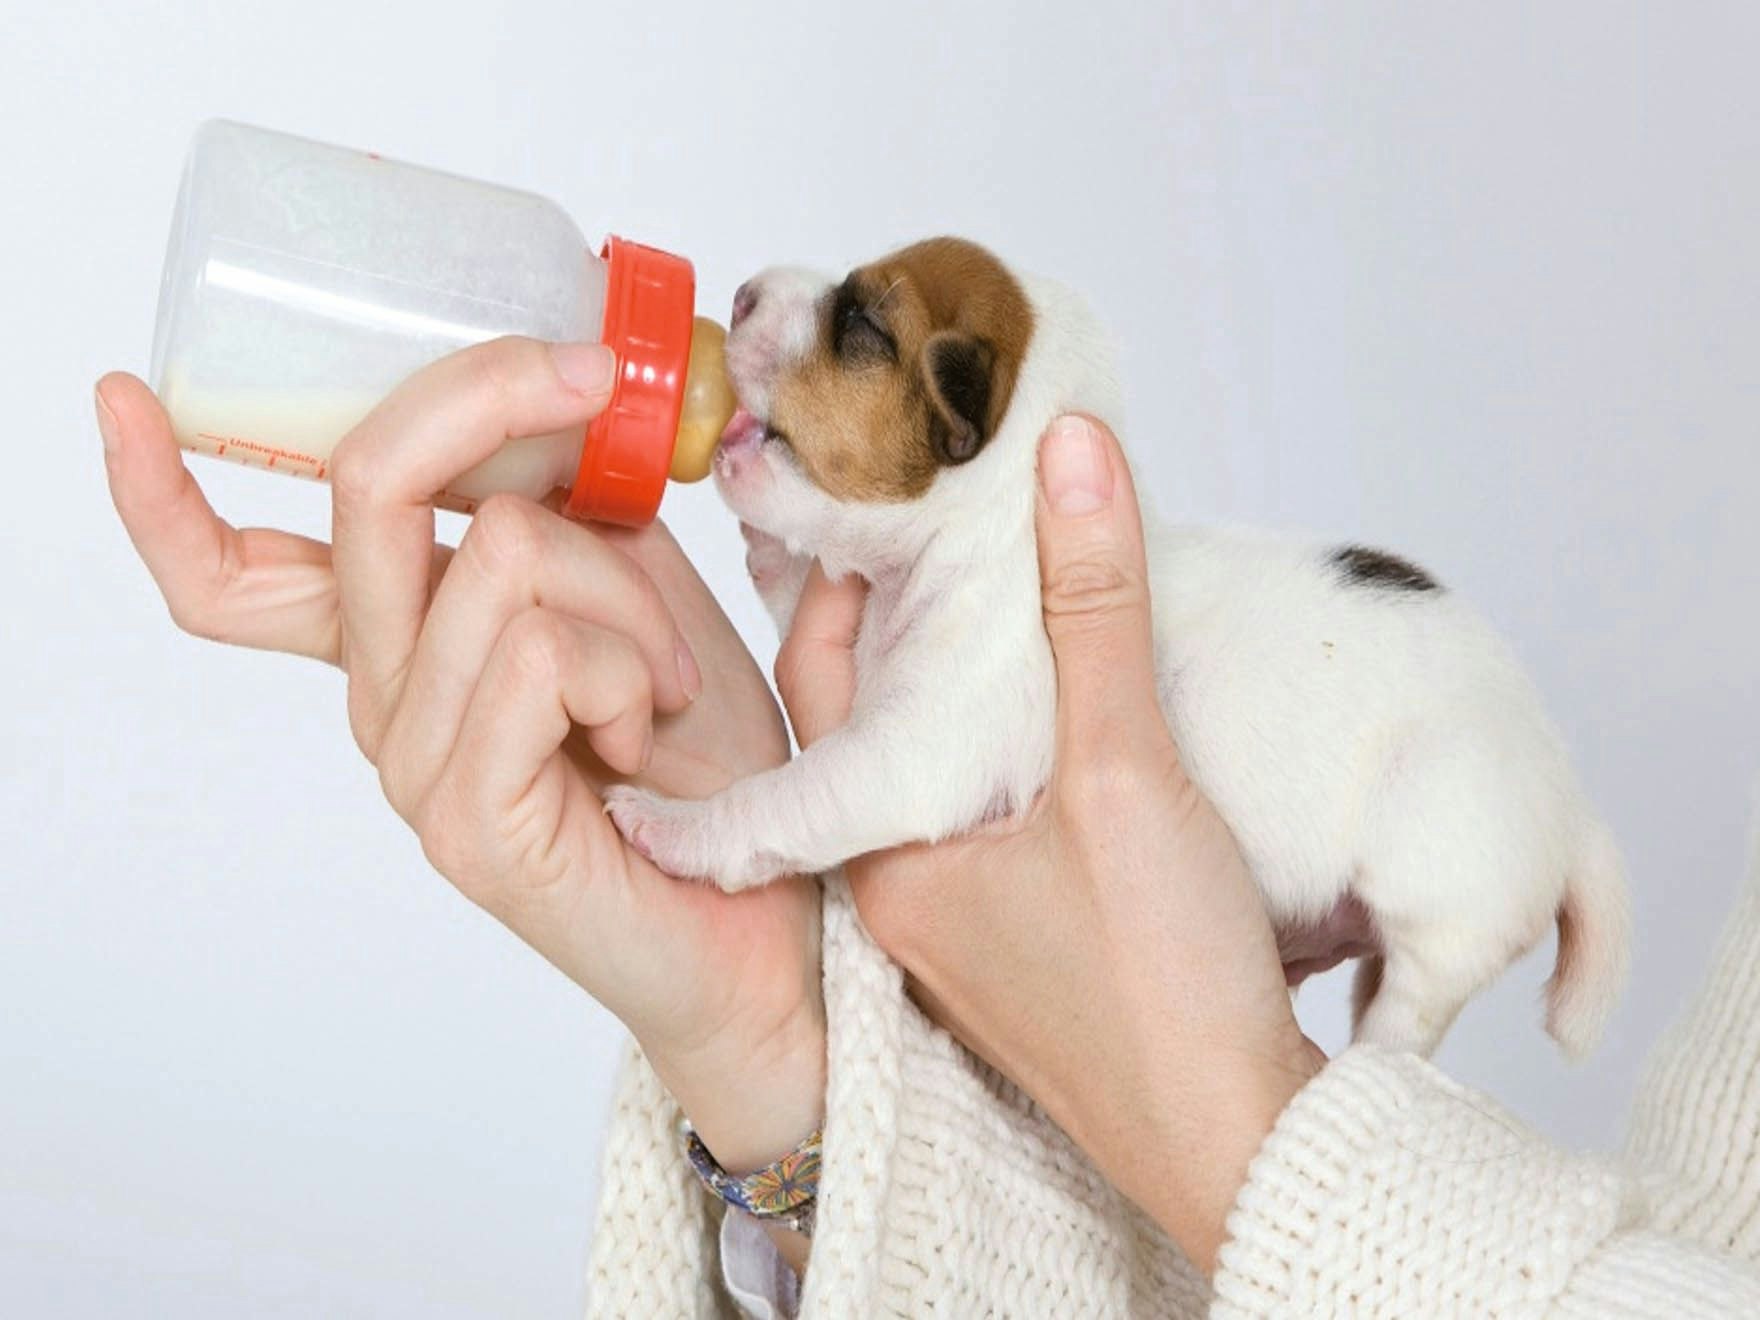 When feeding a newborn puppy, the nipple should be aligned straight into the mouth